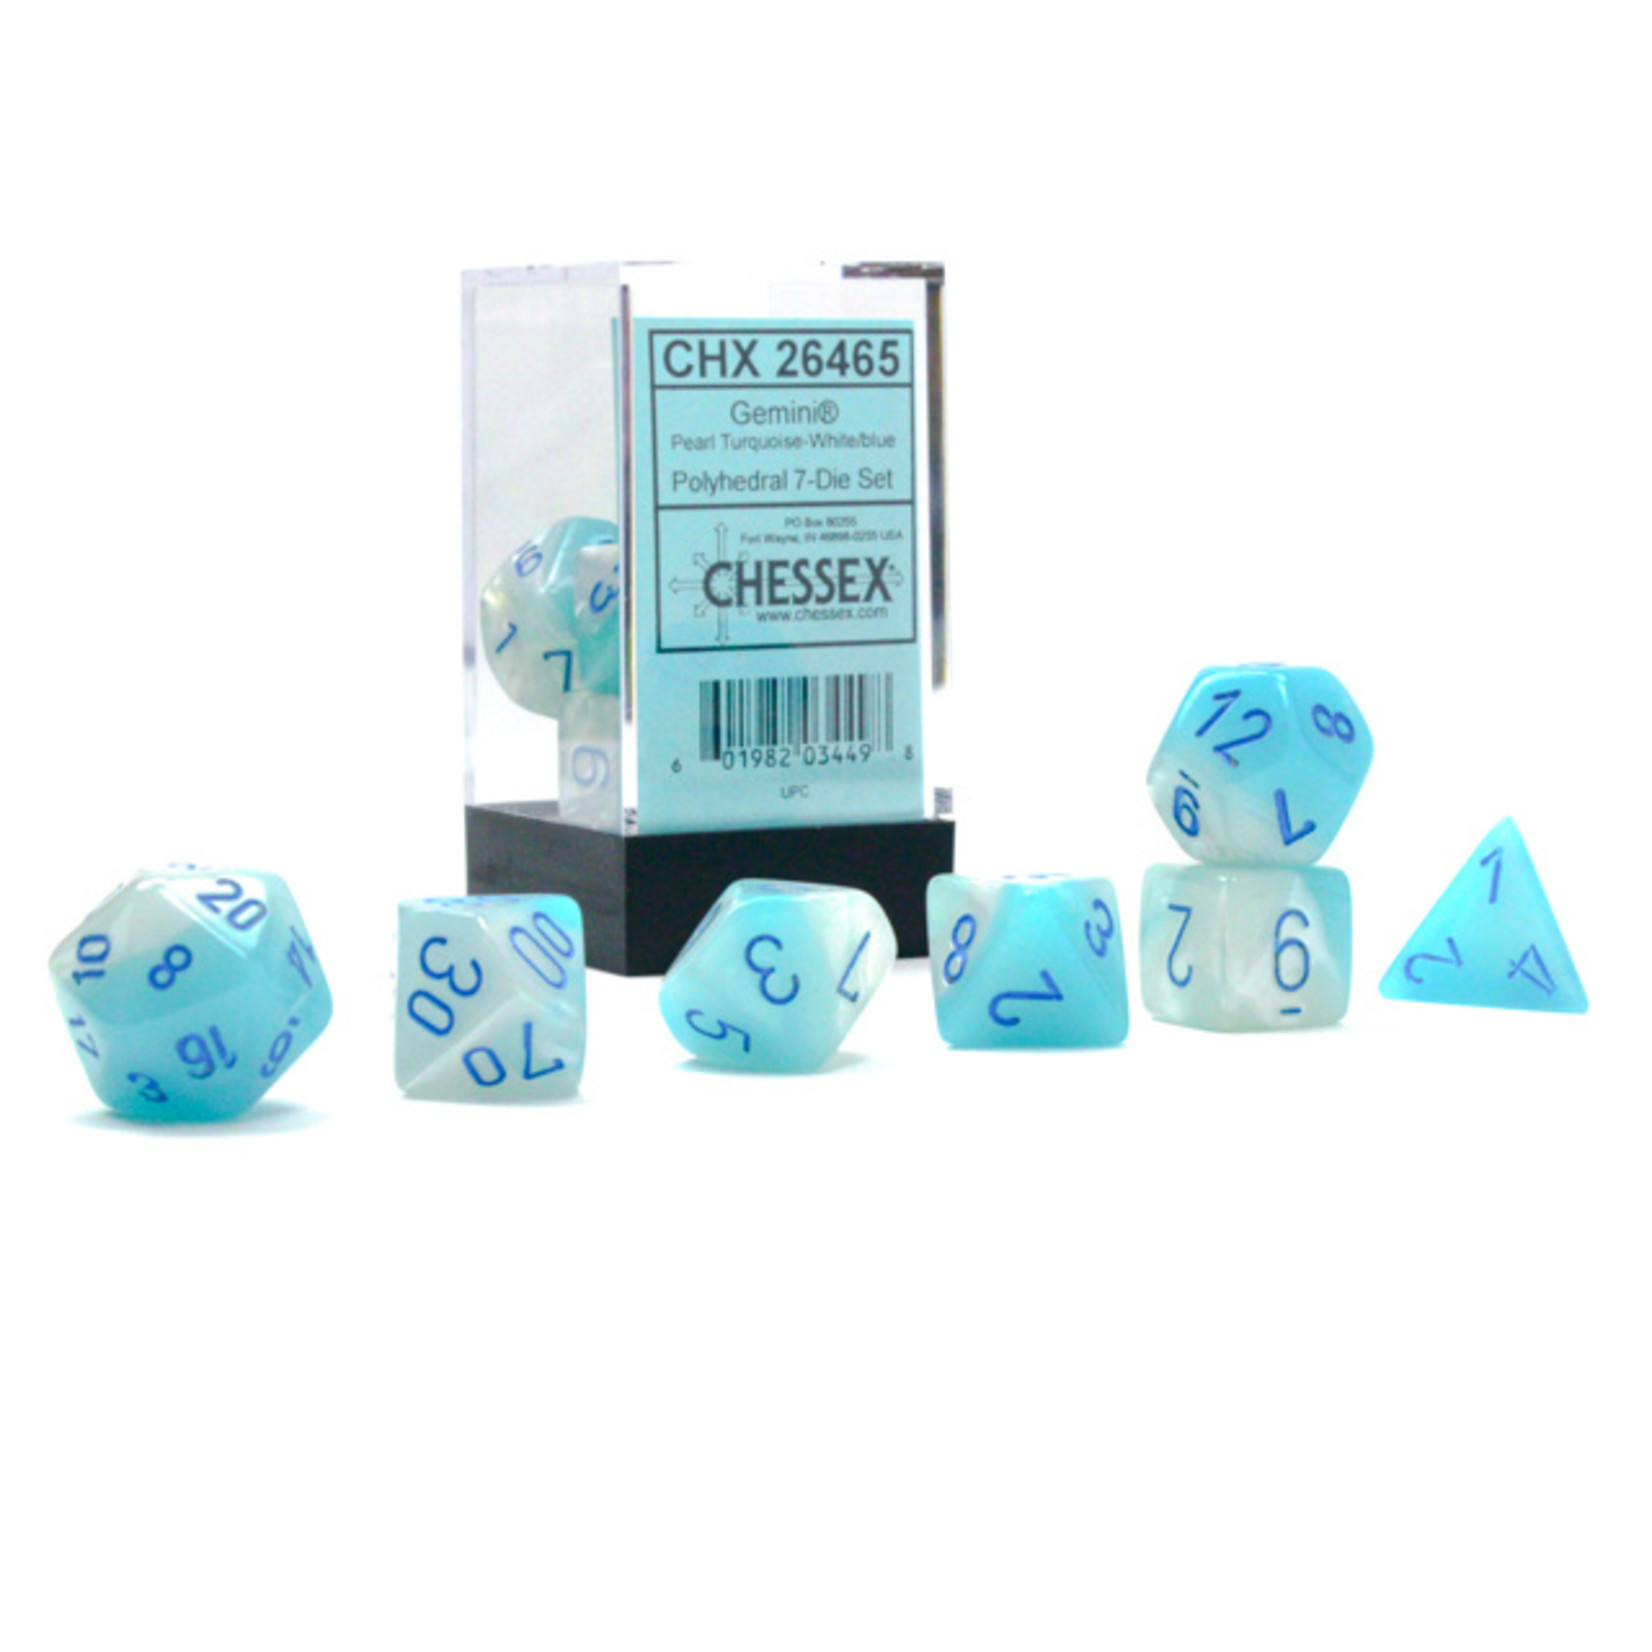 Chessex 26465 Gemini Pearl Turquoise and White with Blue 7-Set